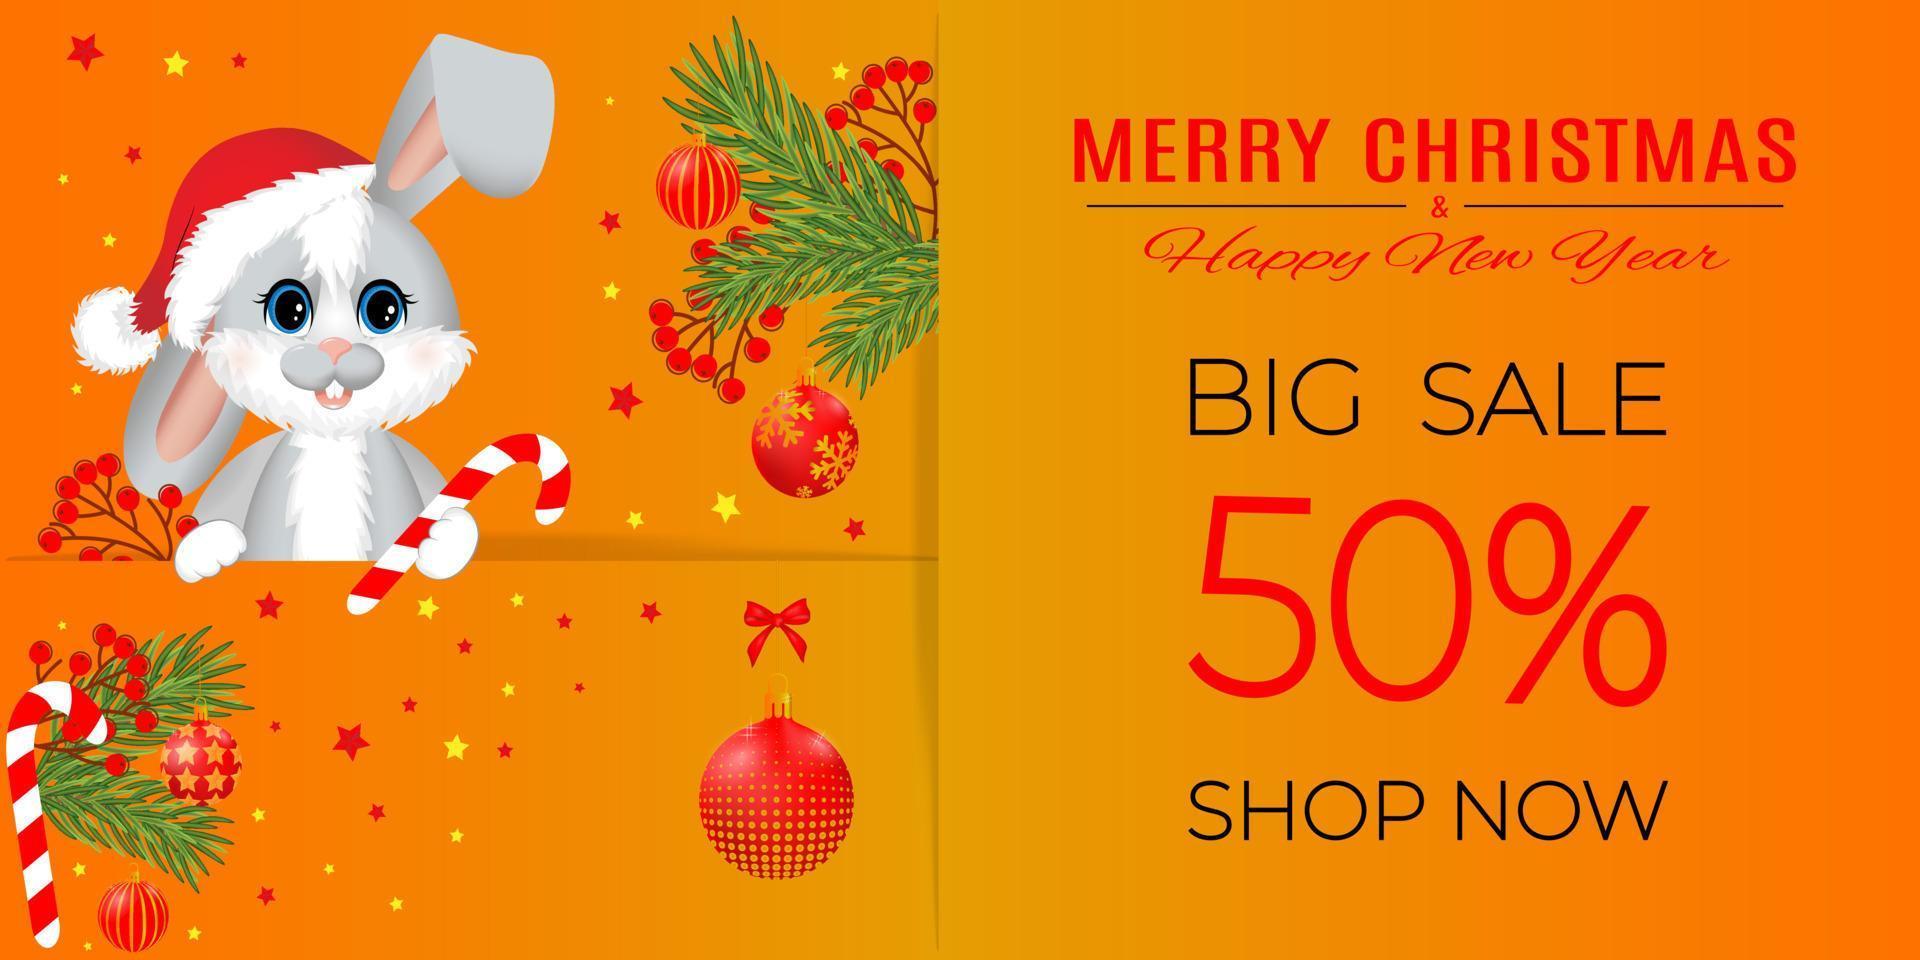 Sale banner with rabbit or hare, Christmas ball and bow in orange and red colors. vector